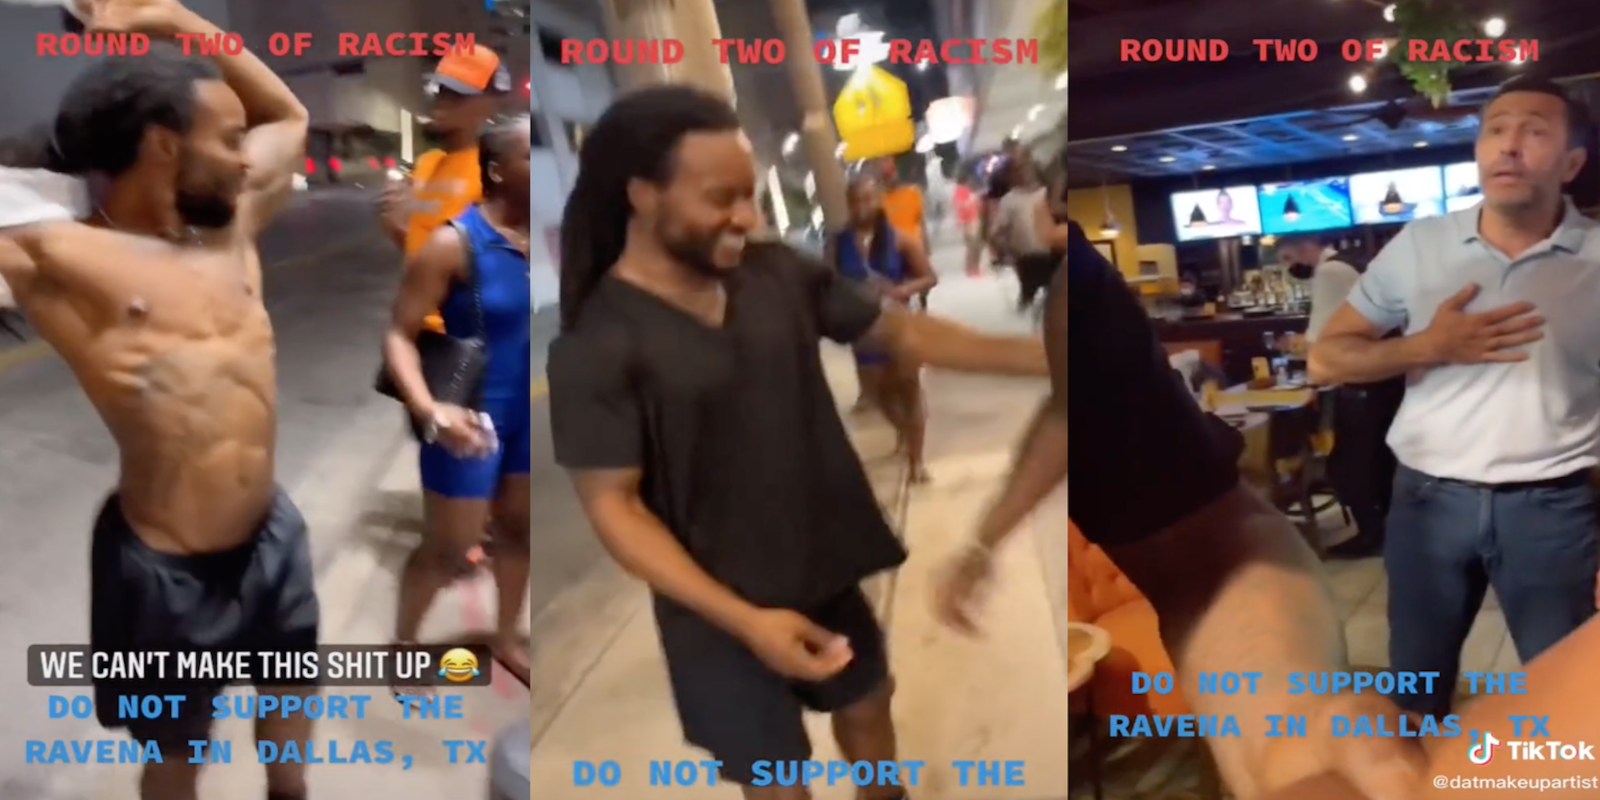 Three panel screenshot from TikTok where family is refused service for clothing. First panel shows man taking off tanktop. Second panel shows man wearing Black shirt traded with mom. Third panel shows restaurant manager standing at doorway of restaurant.